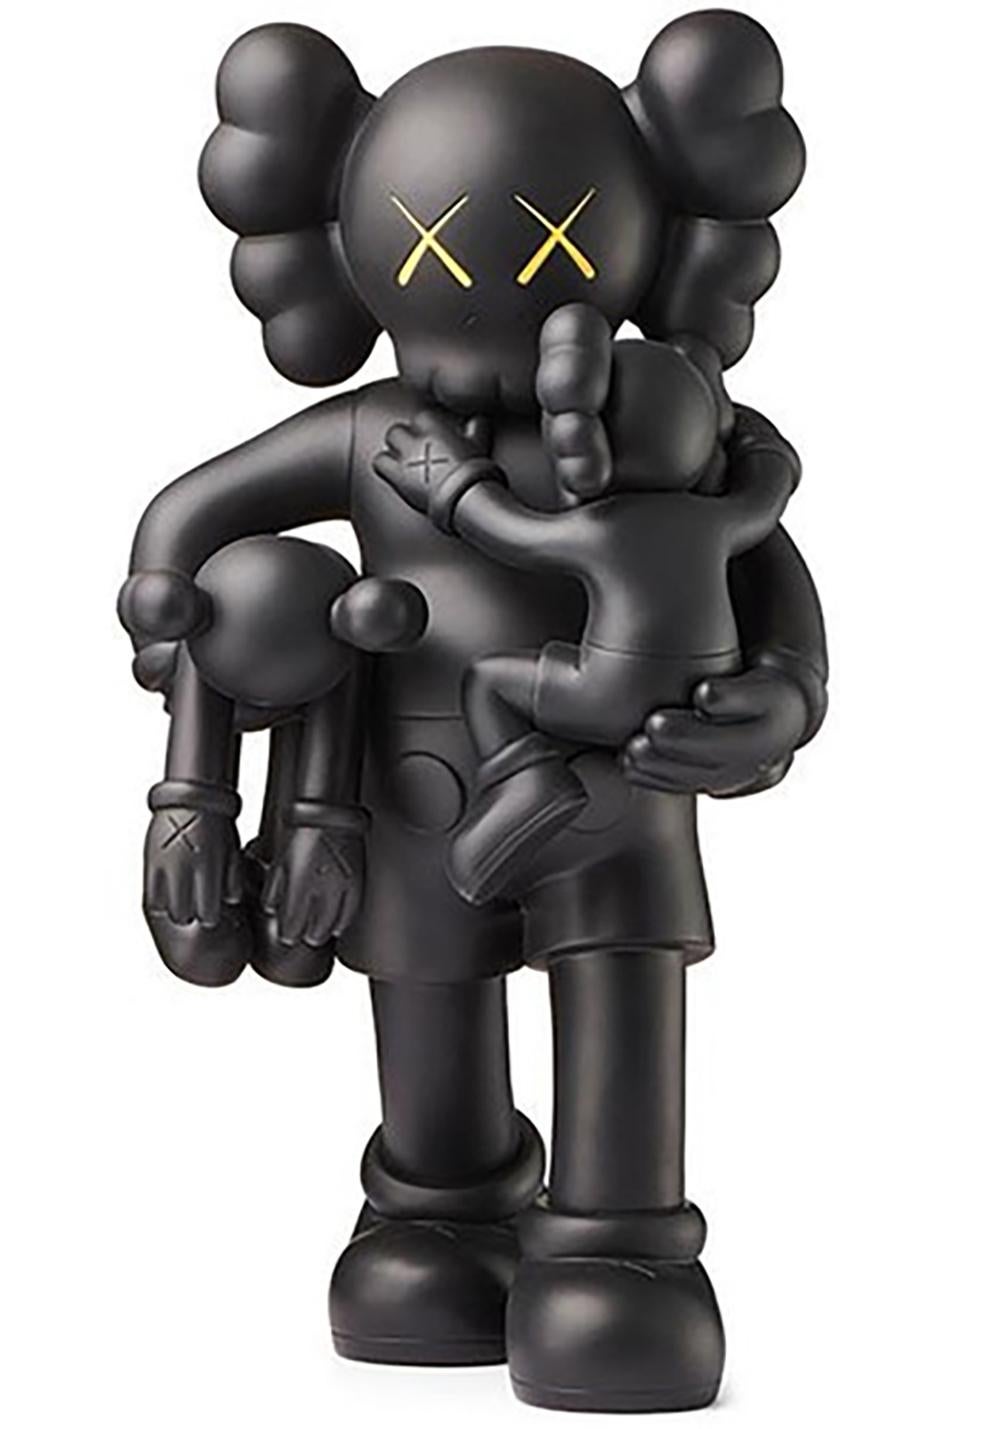 KAWS Clean Slate (Black), new & unopened in its original packaging.
Sold Out edition after the artist's retrospect exhibition at the Modern Art Museum of Fort Worth

Medium: Vinyl & Cast Resin
14.25 x 7 x 7 inches
Unopened; excellent condition
From